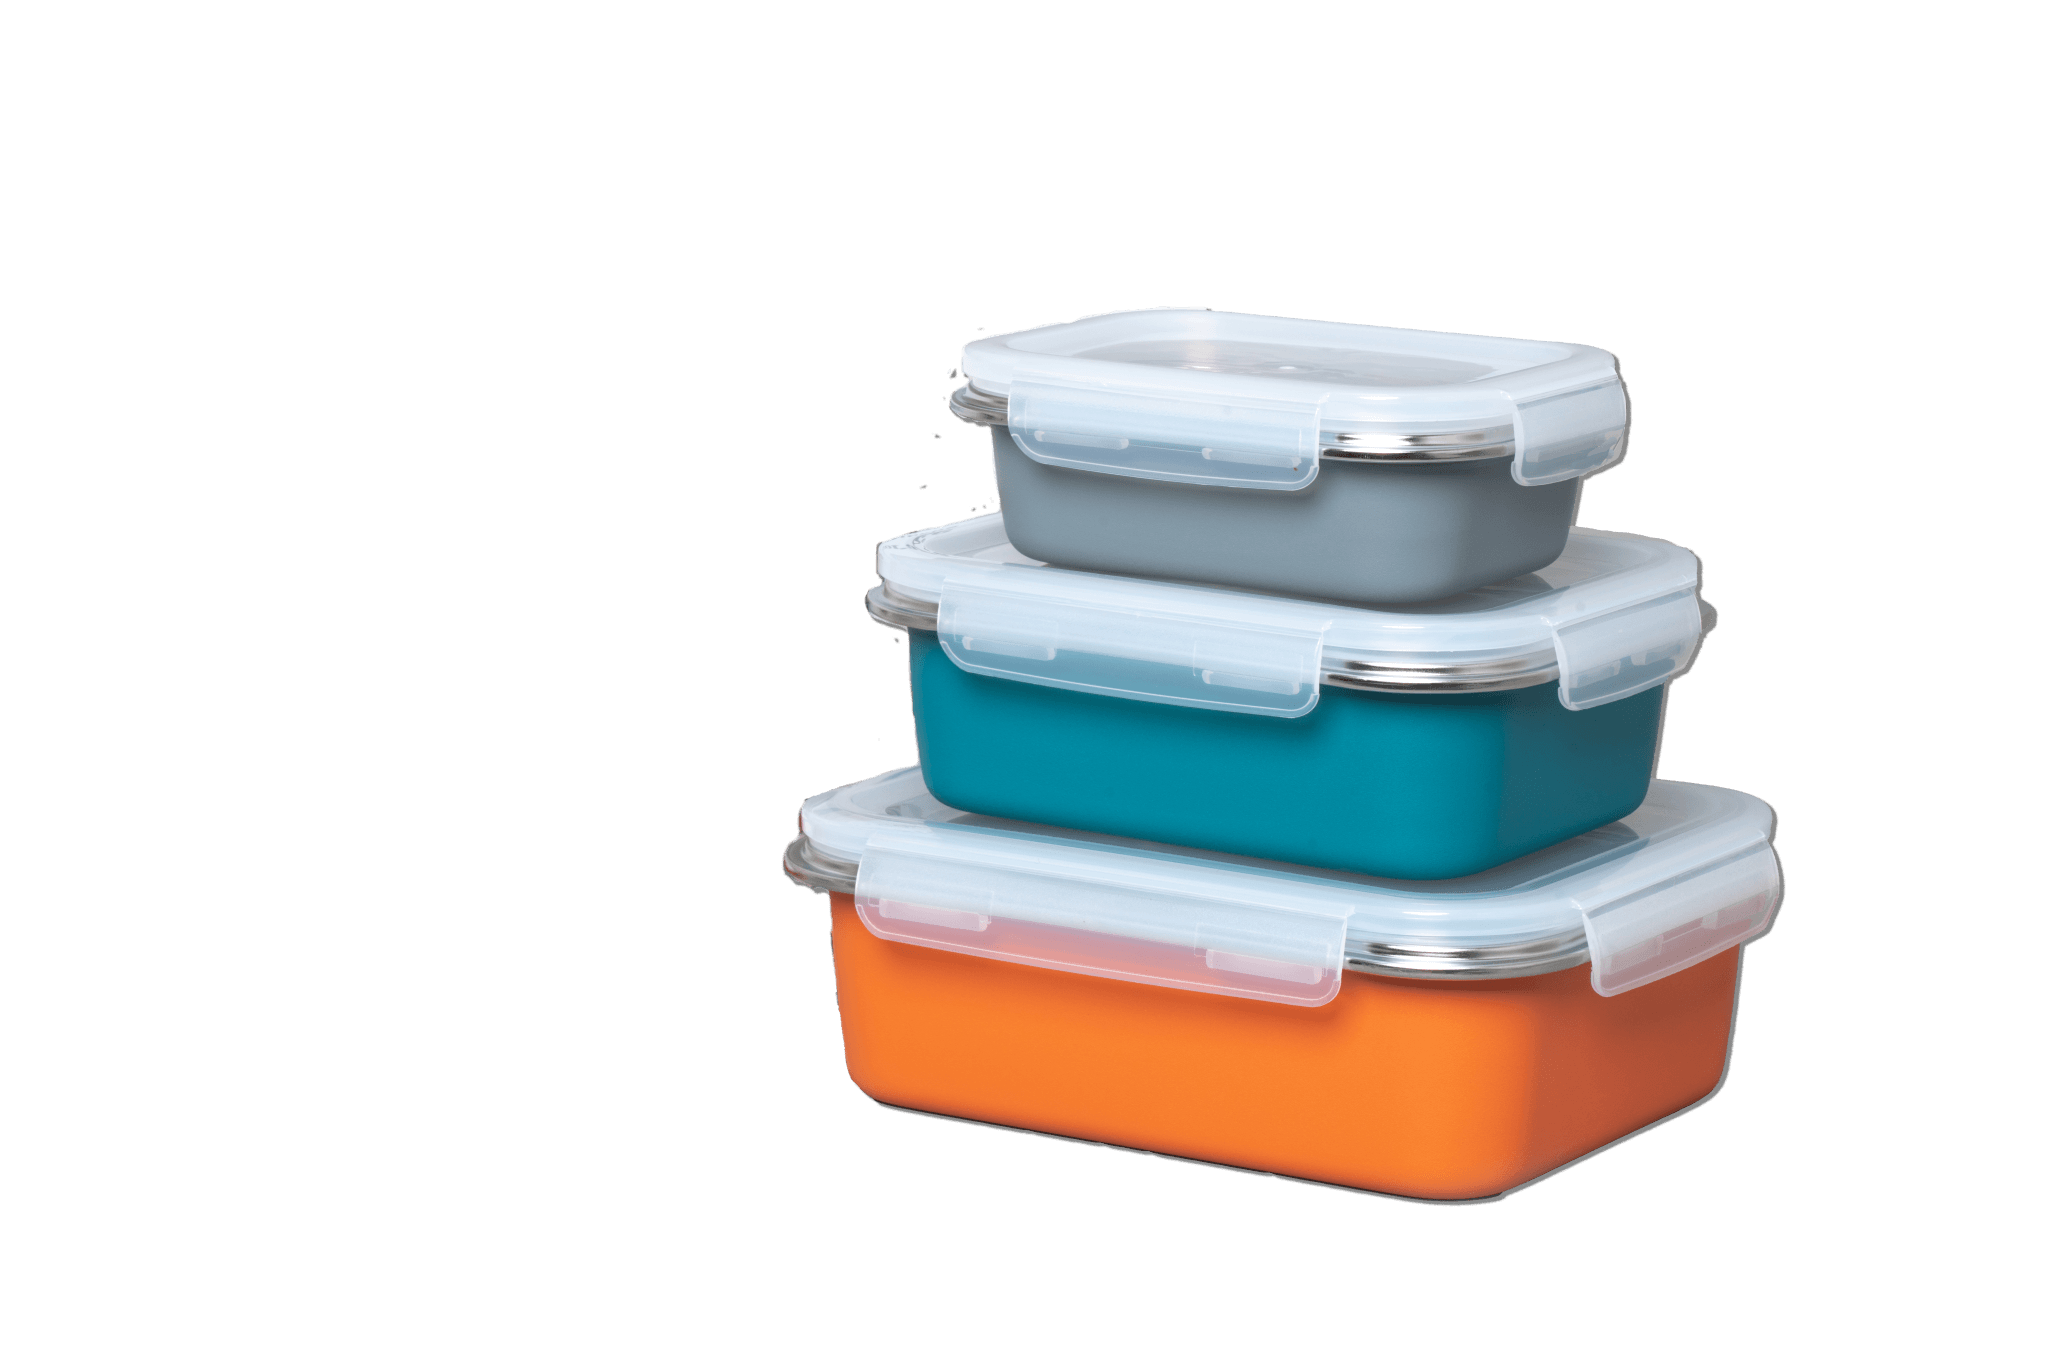 Jiji Portable Stainless Steel Soup Container – Shinise